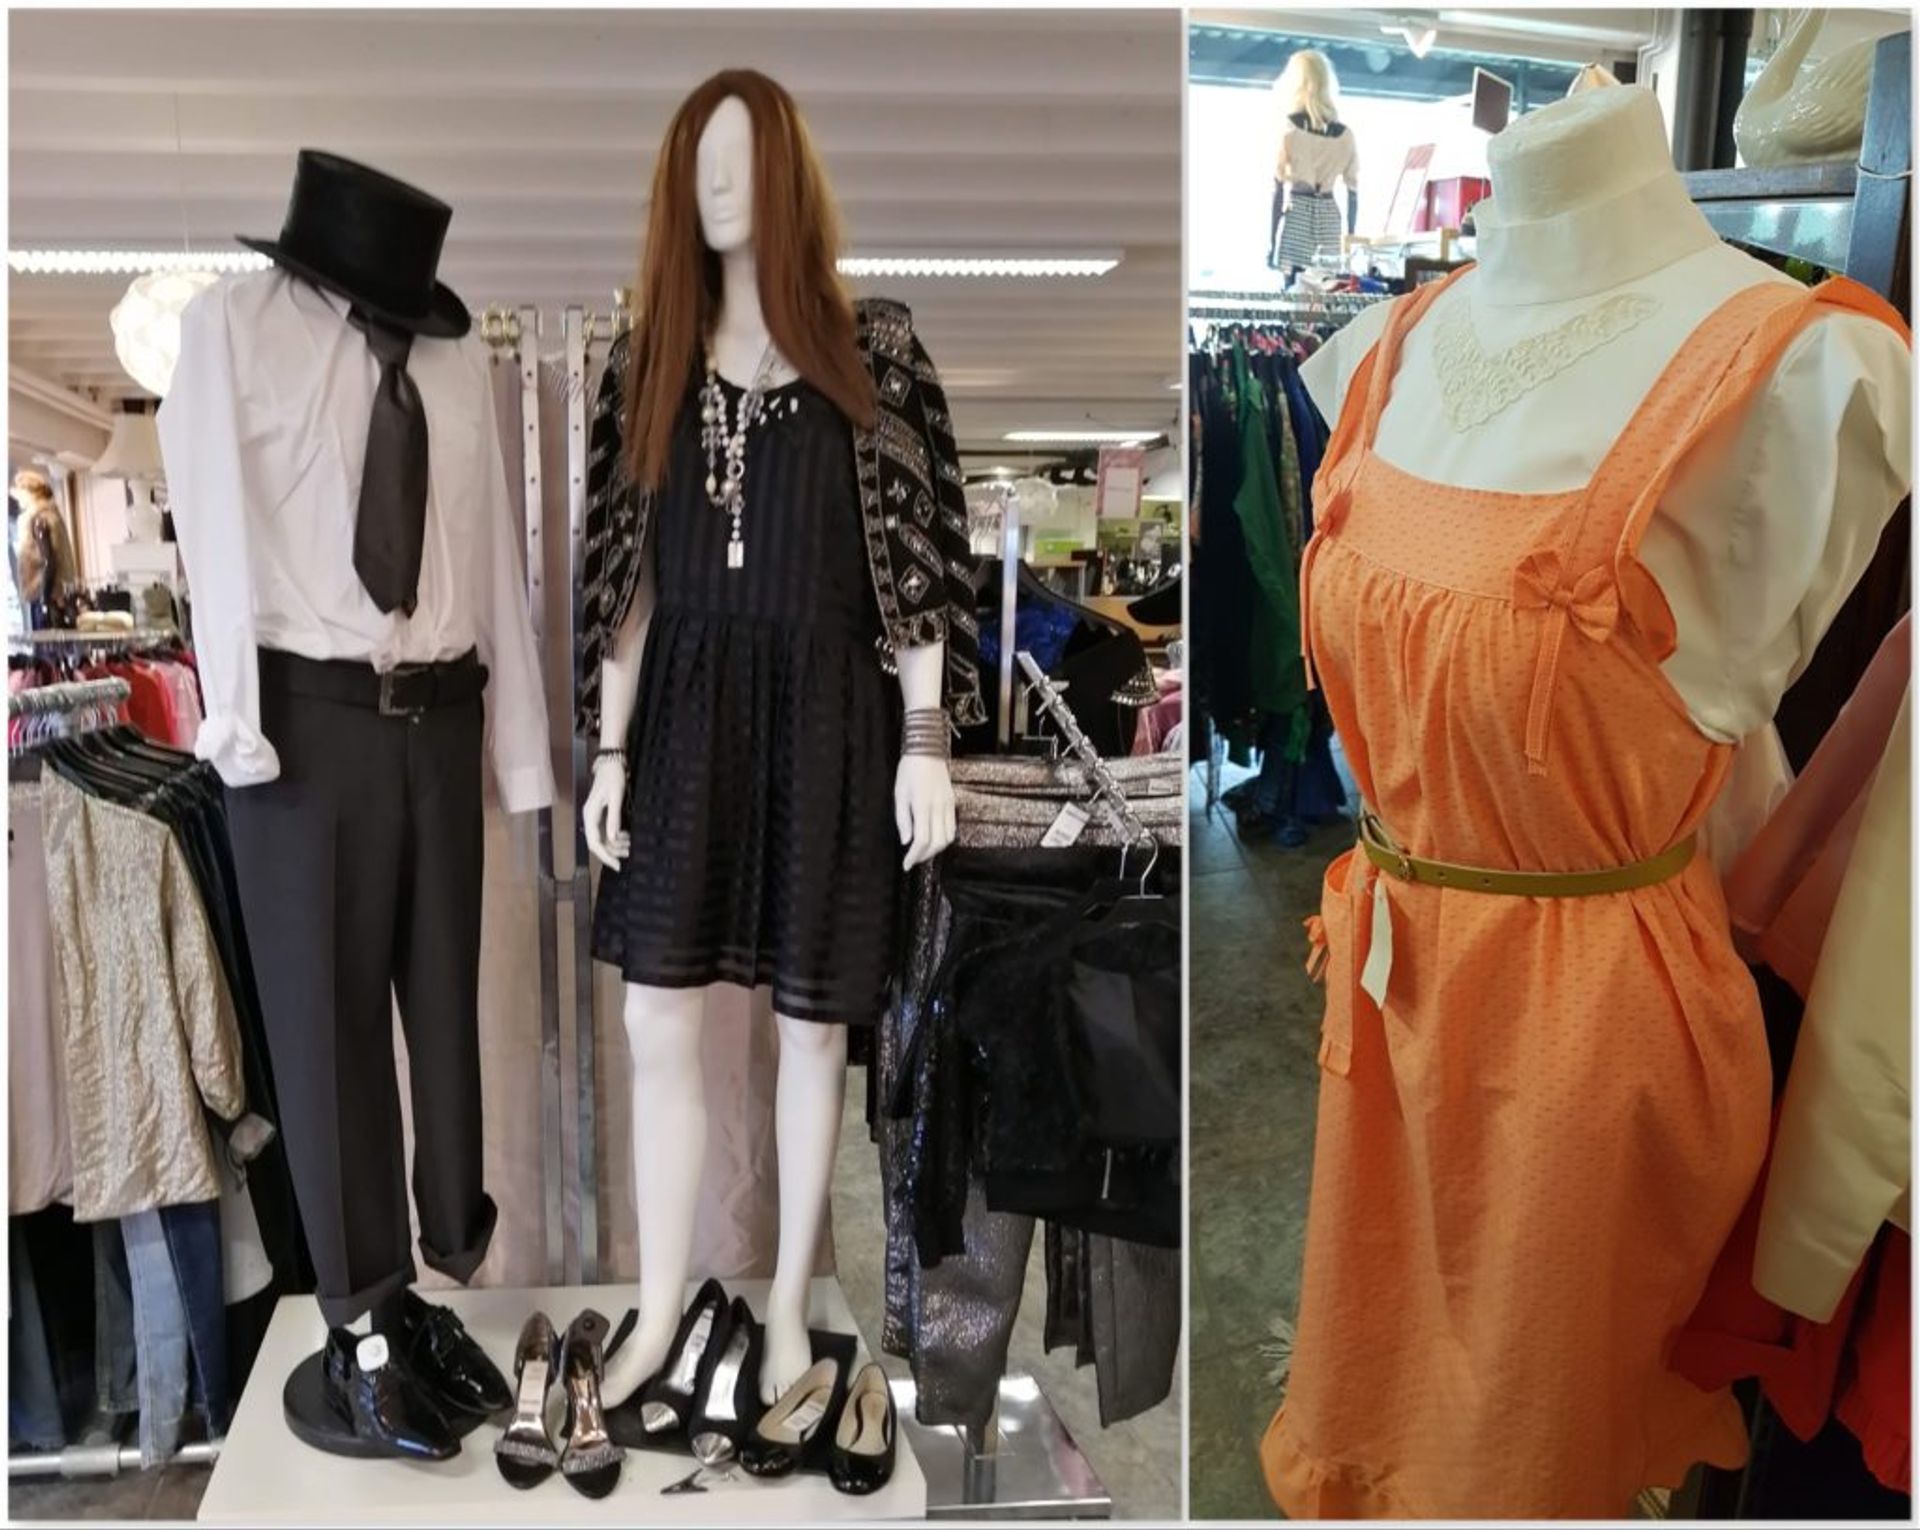 Three mannequins dressed in clothes that are on sale.